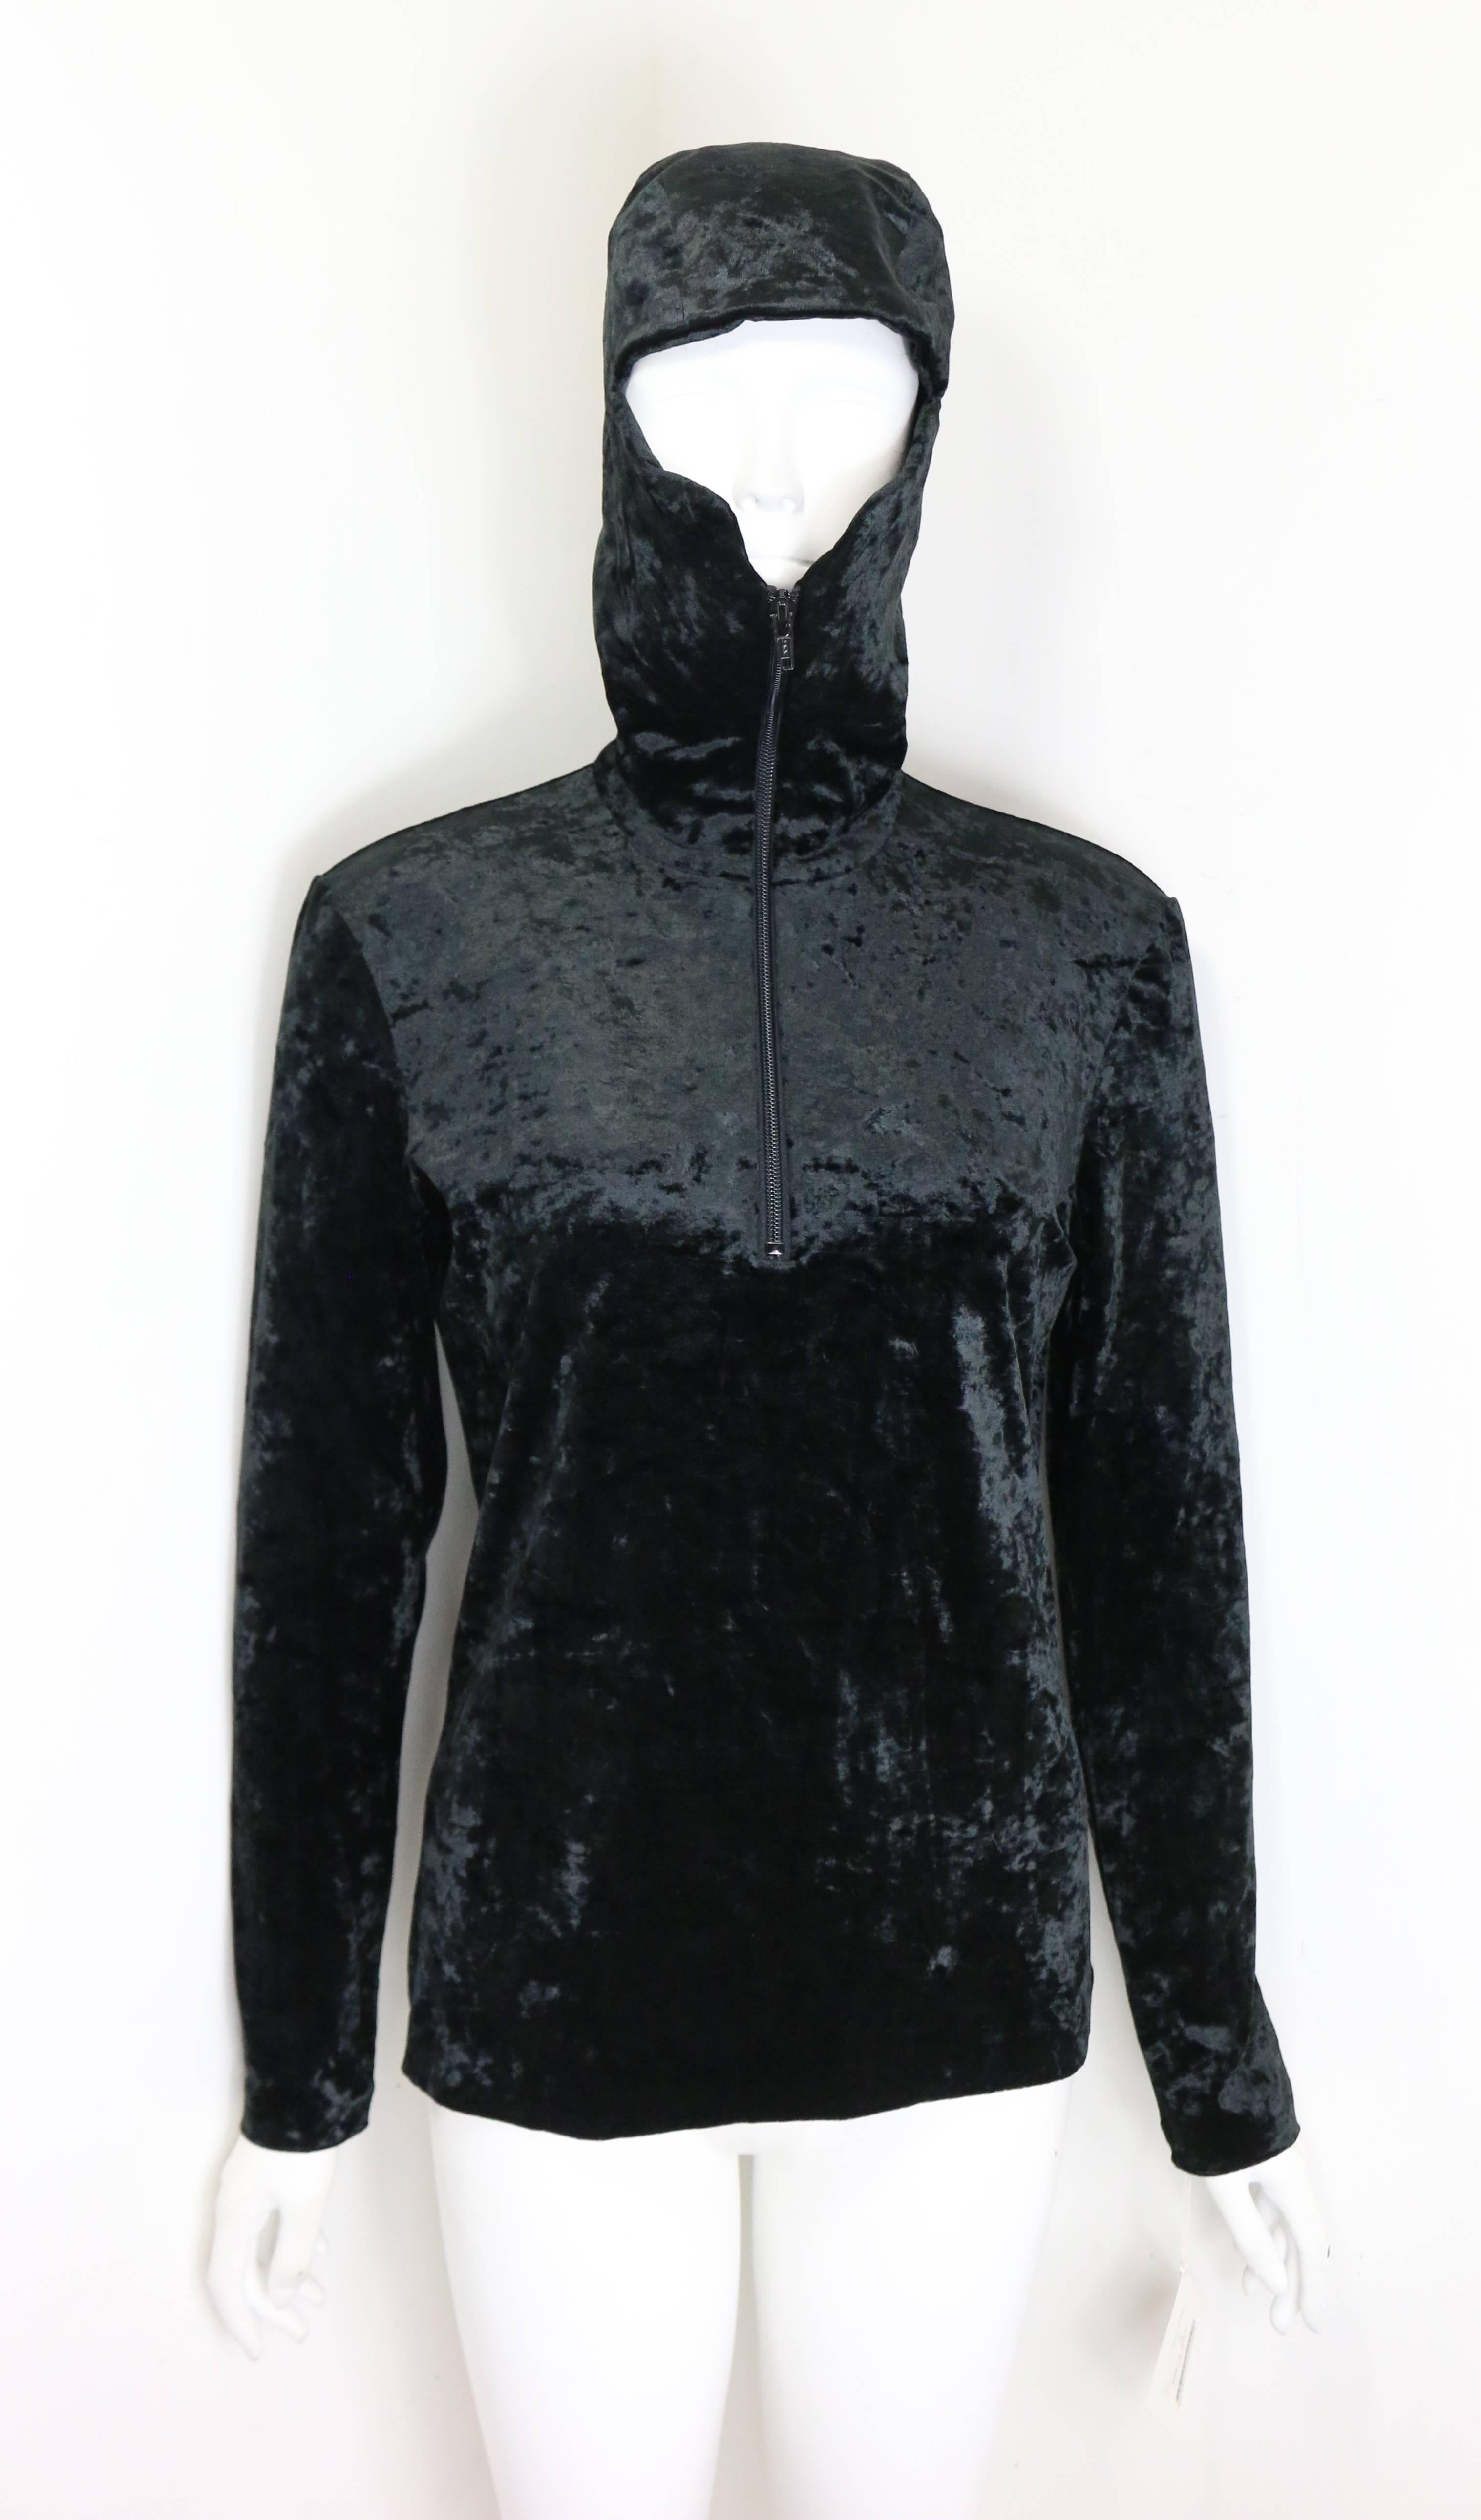 - Vintage 90s Issey Miyake black crush velvet zipper pullover sweater with hoodie. This hoodie top can be worn in different style. 

- Made in Japan. 

- Size M. 

- 60% Triacetate, 30% Nylon, 10% Polyurethane. 

- Shoulder: 14 inches. Bust: 32